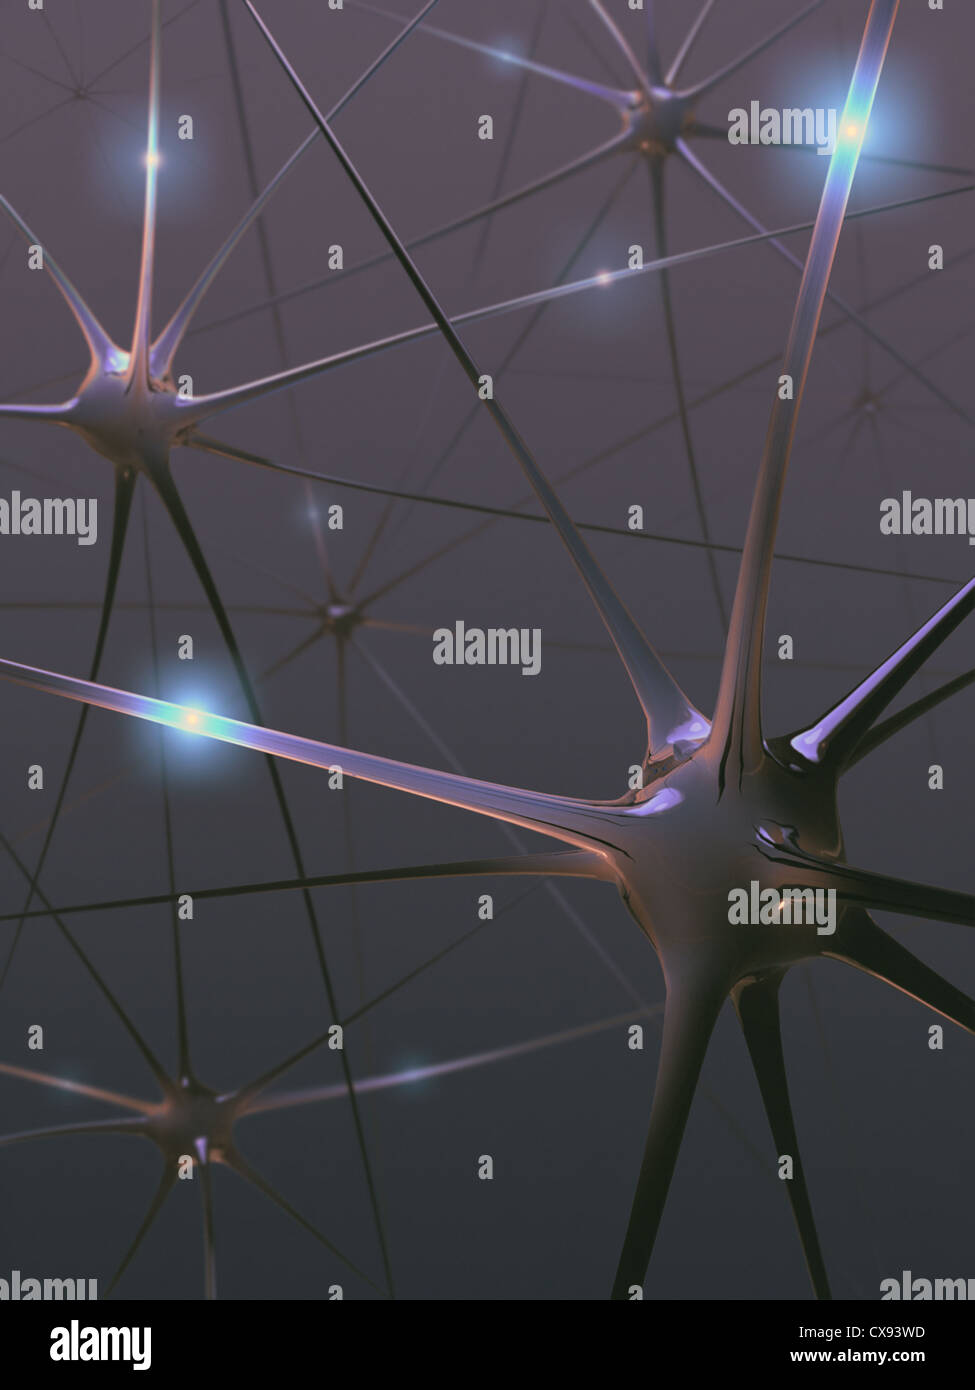 Image concept of a network of neurons in the human brain. Stock Photo